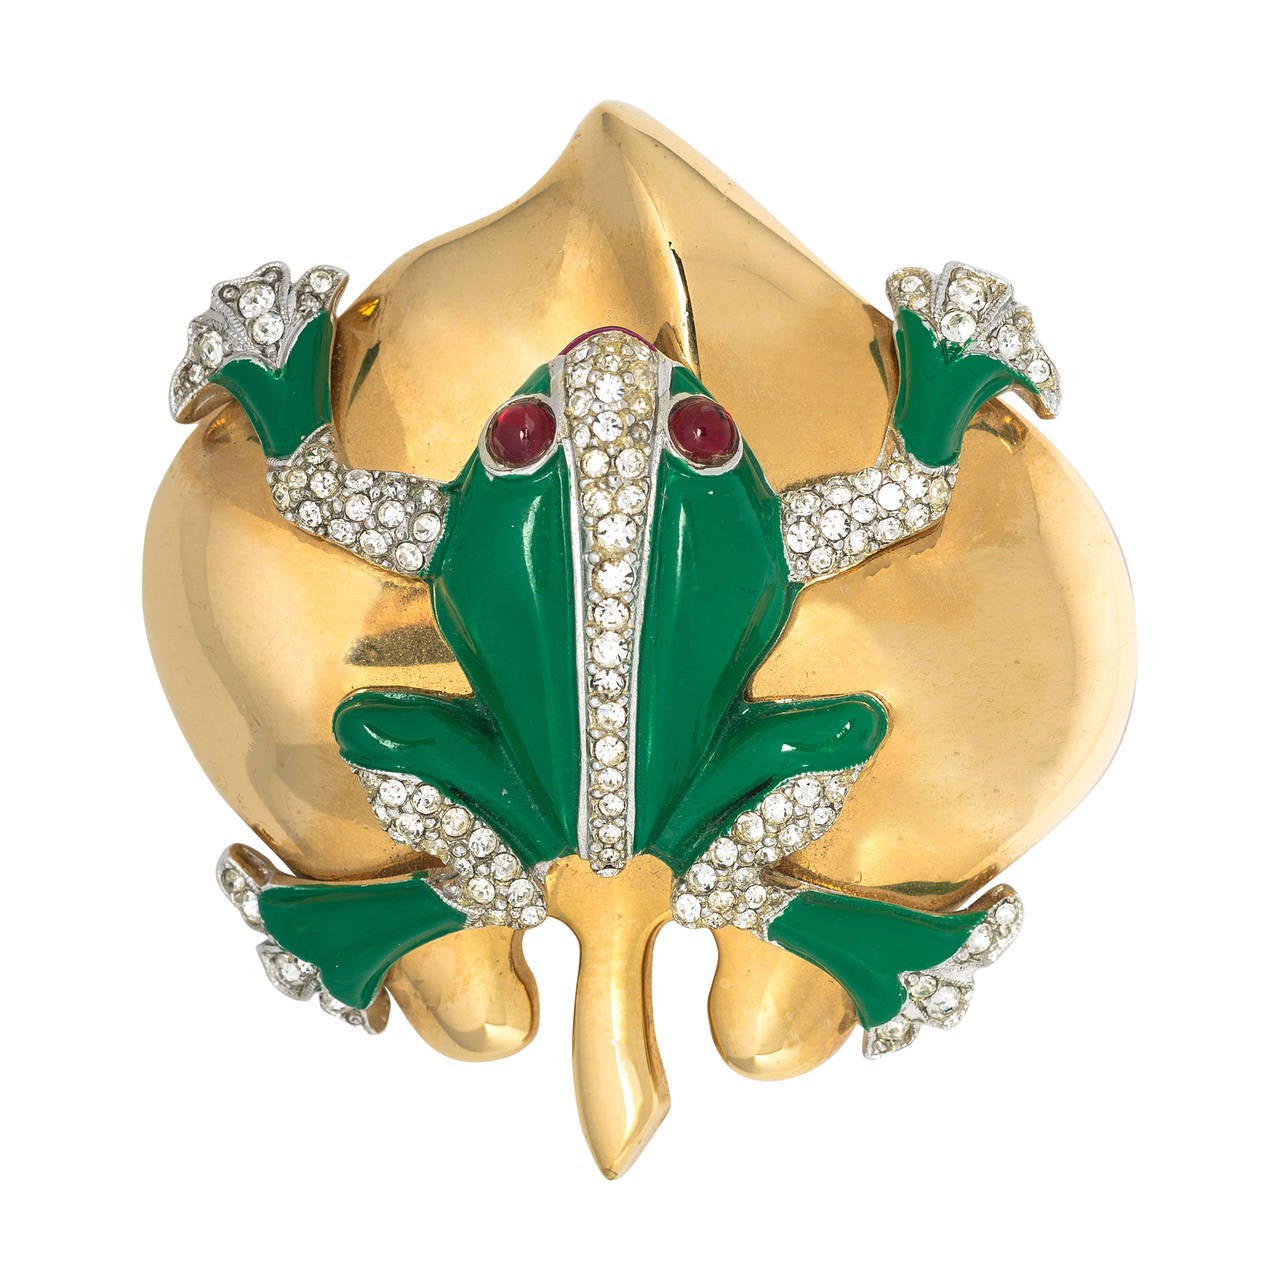 Enameled Frog on Gilt Lily Pad Brooch